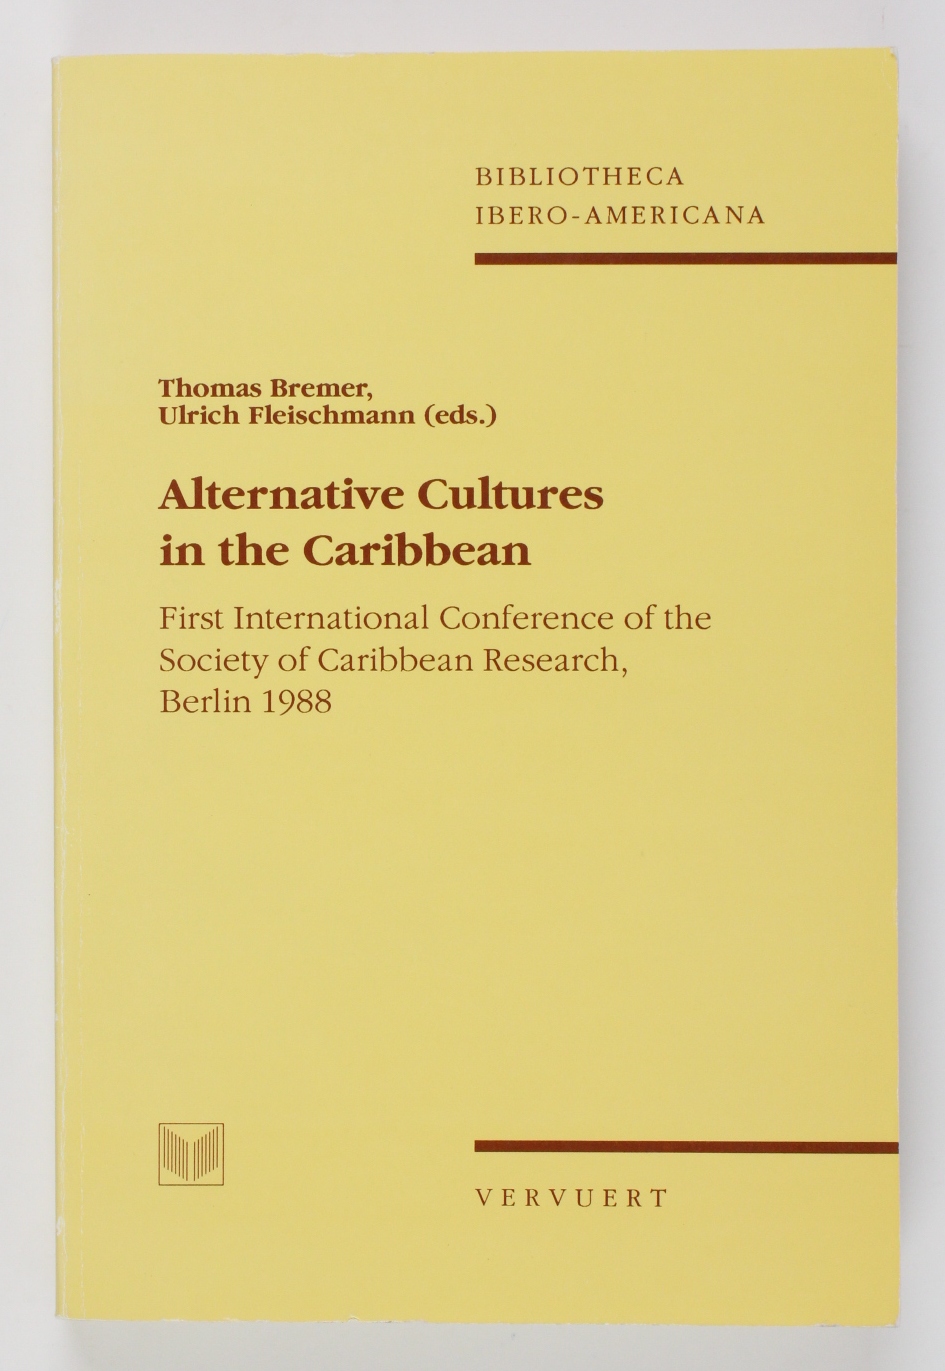 Alternative Cultures in the Caribbean: First International Conference of the Society of Caribbean Research (Bibliotheca Ibero-Americana) (=Bibliotheca Ibero-Americana Band 46) - Bremer, Thomas and Ulrich Fleischmann